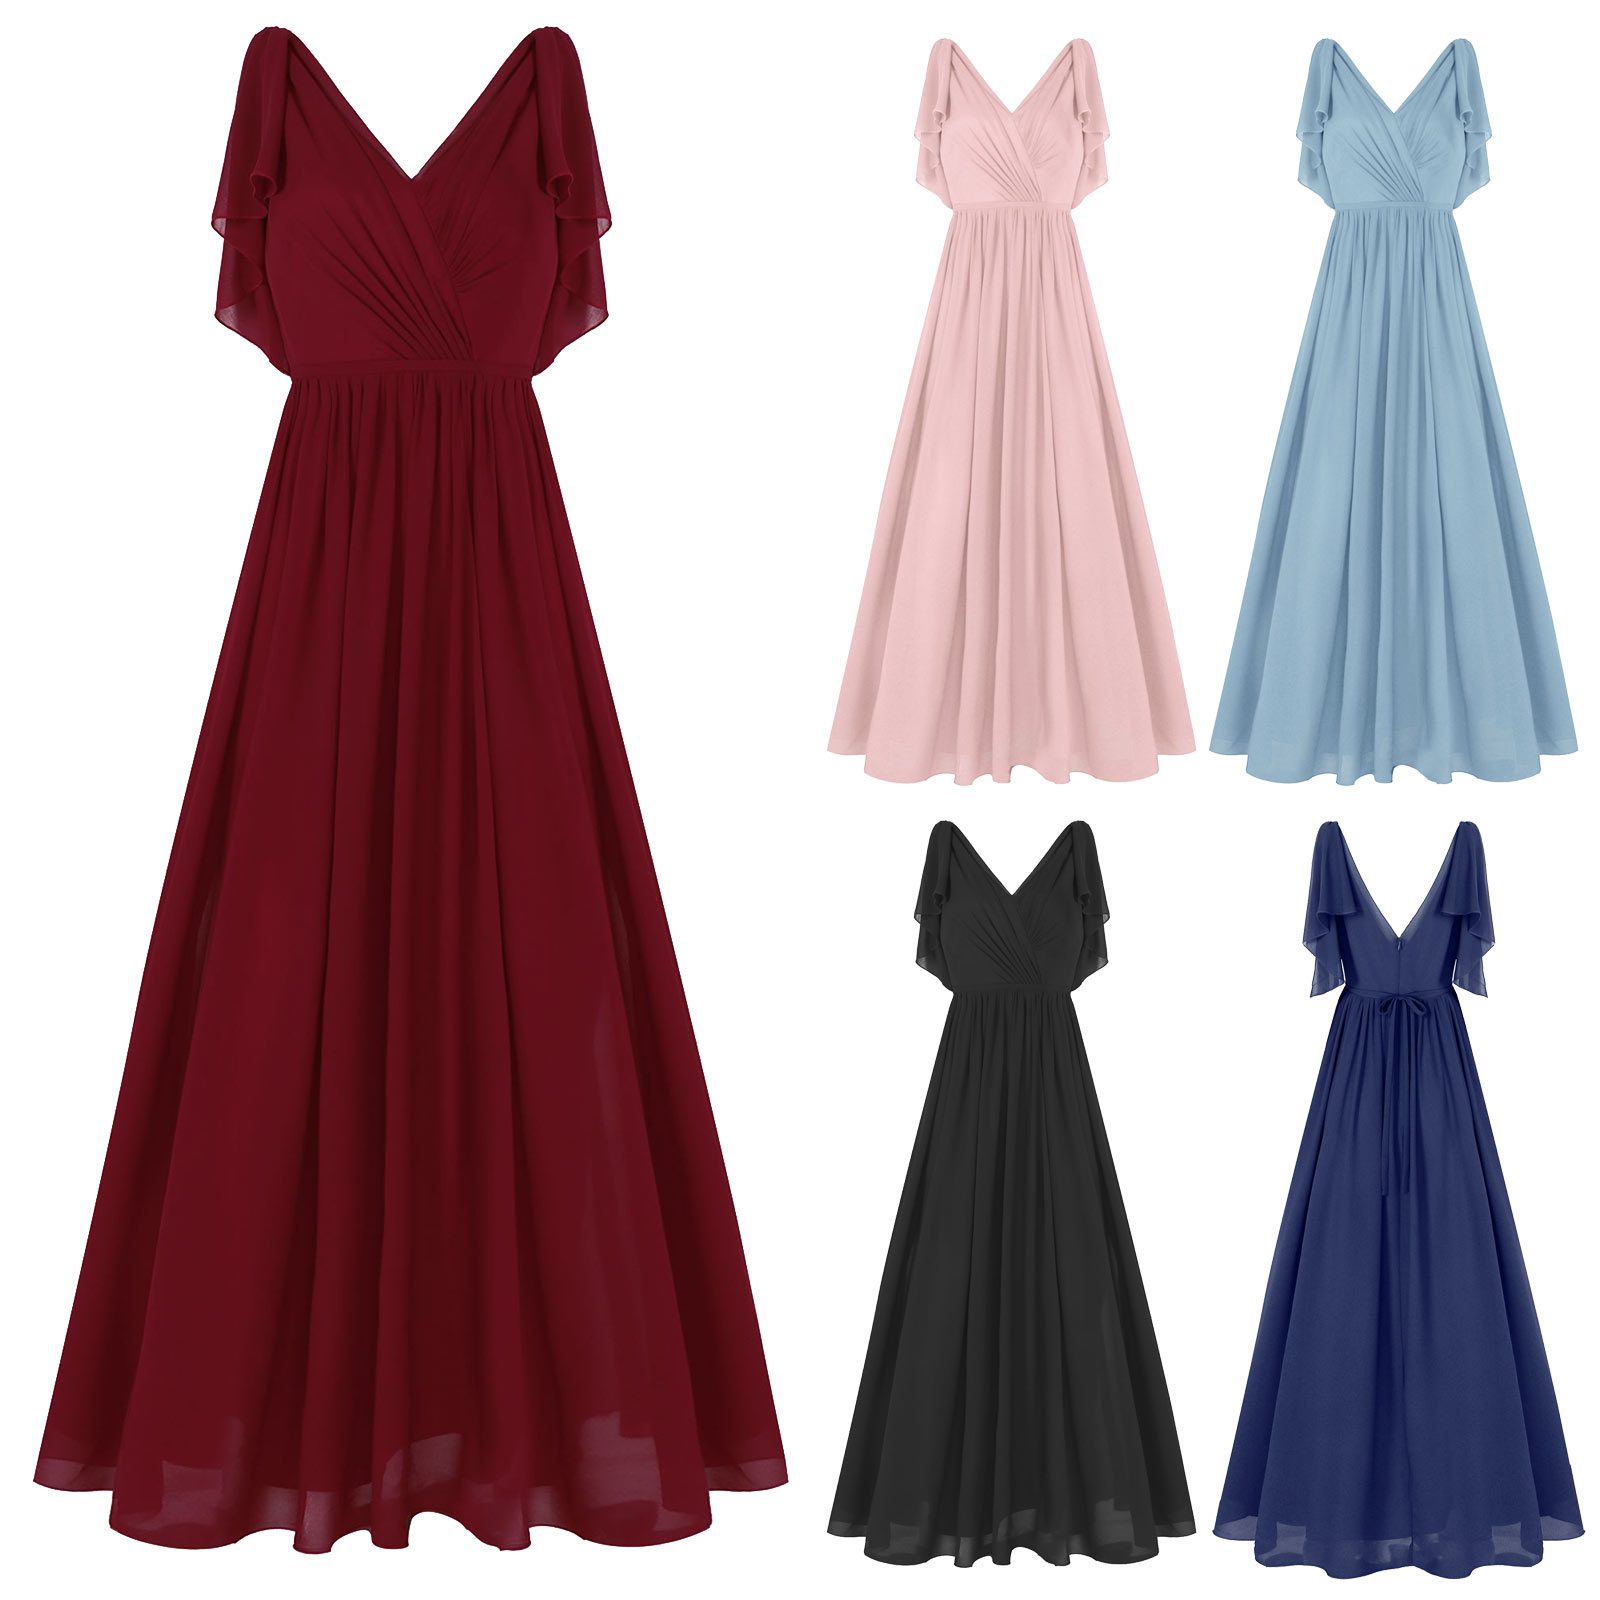 Bridesmaid Dresses Sexy Womens Ladies Deep V Neck Open Back Ruffled Chiffon Pageant Elegant Dress for Wedding Party Prom Gown